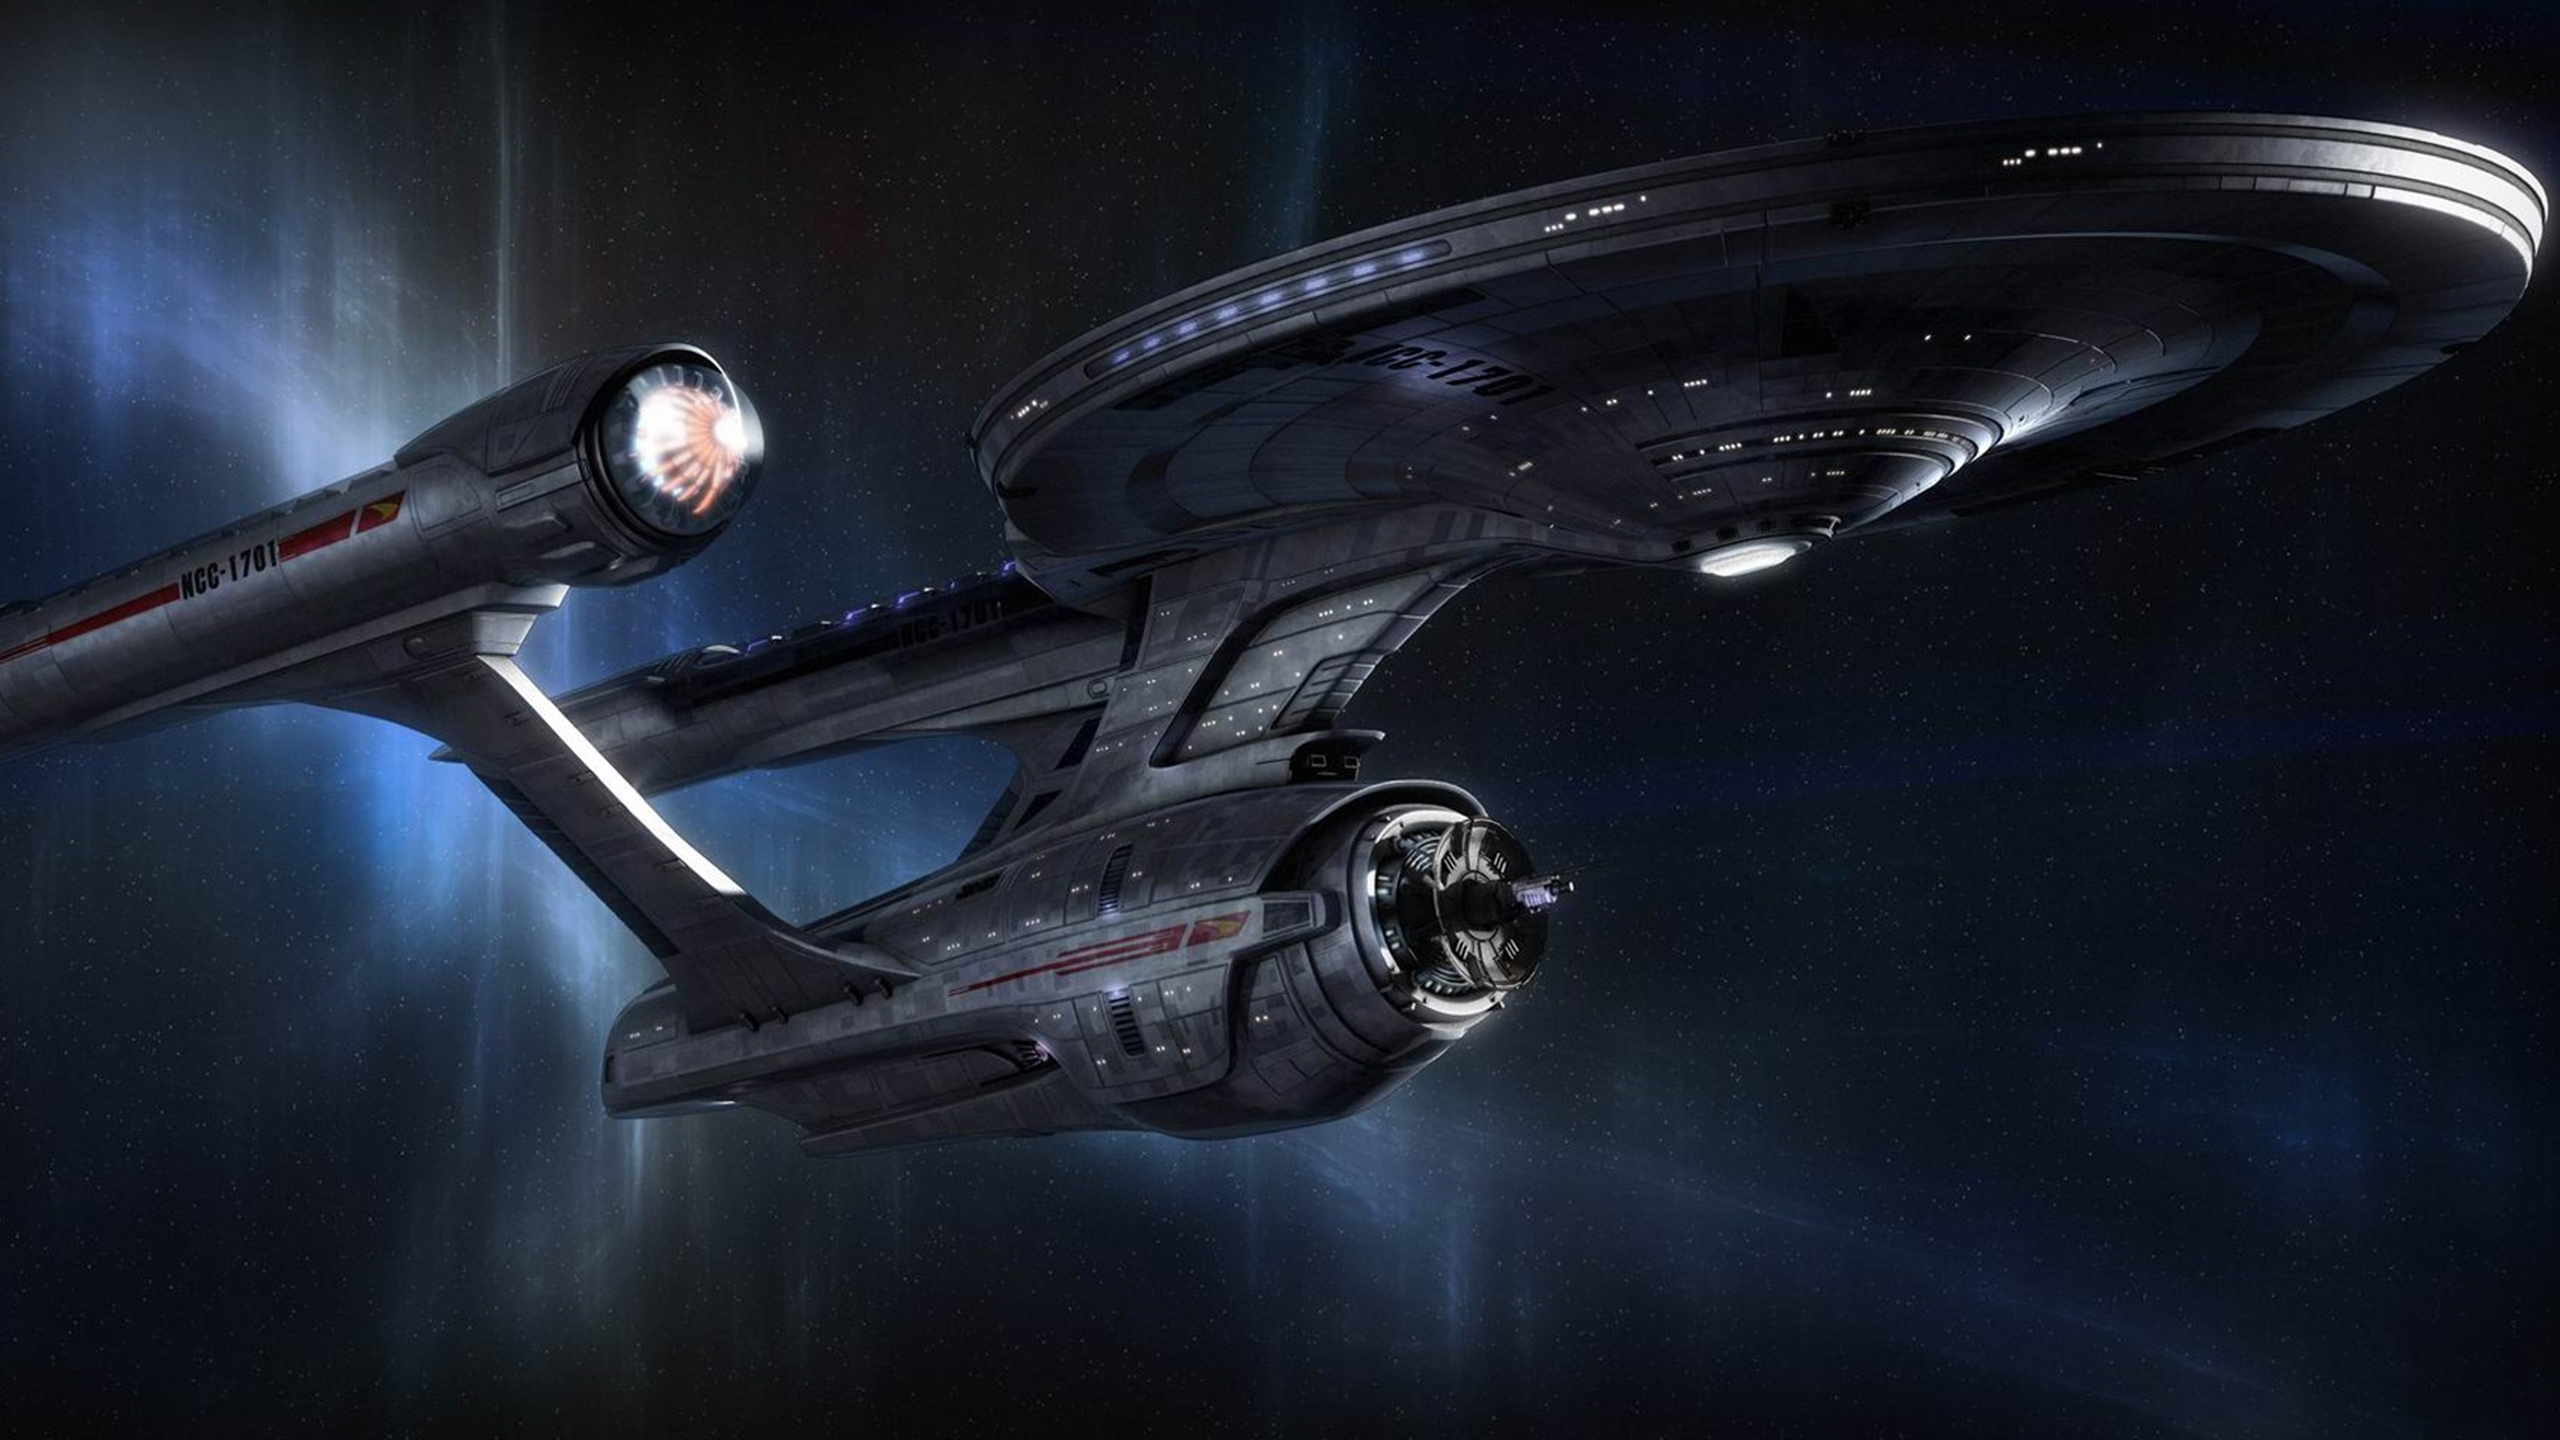 2560x1440 60+ Star Trek HD Wallpapers and Backgrounds